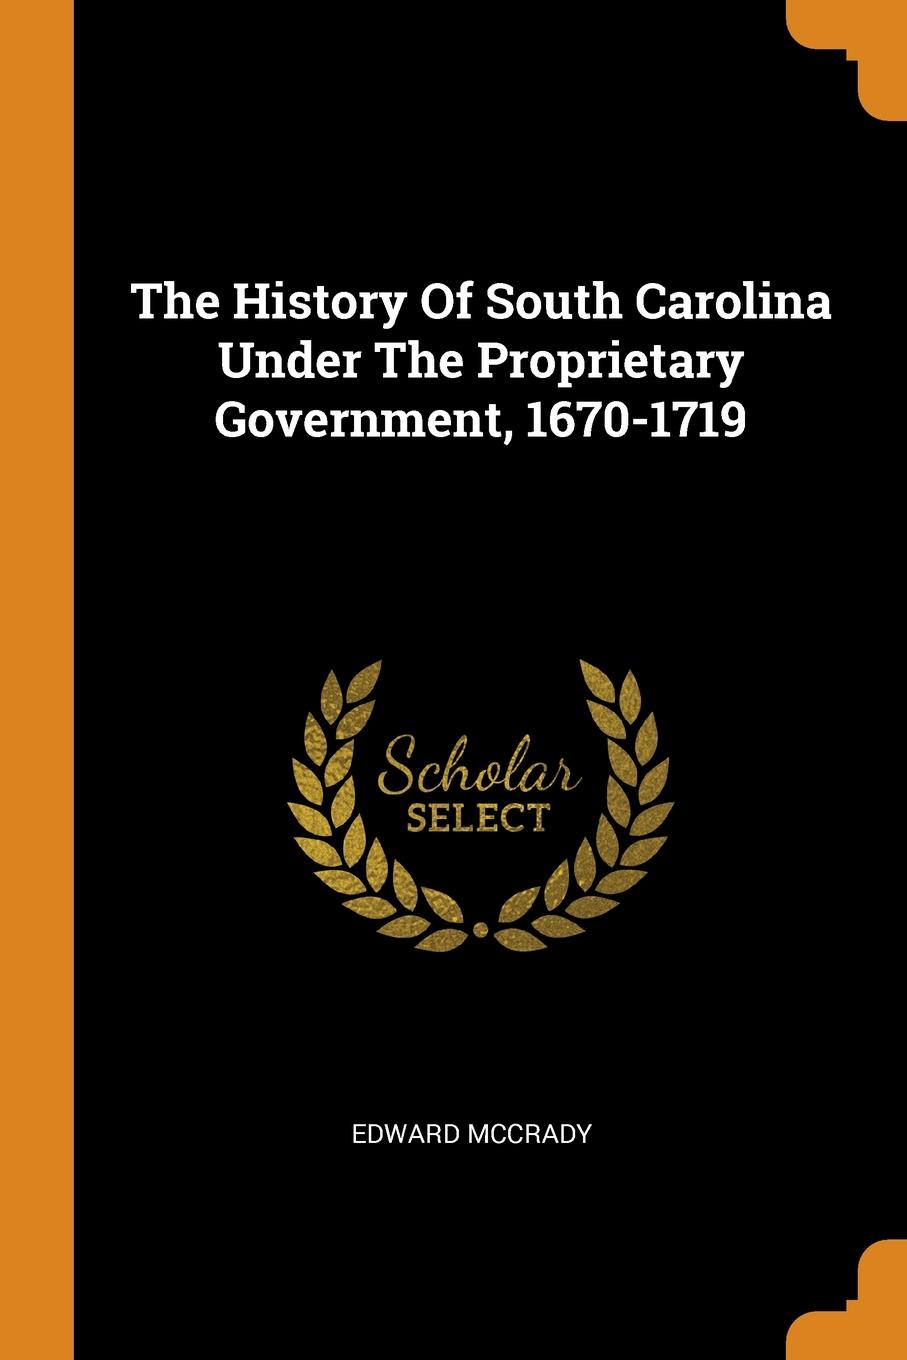 The History Of South Carolina Under The Proprietary Government, 1670-1719